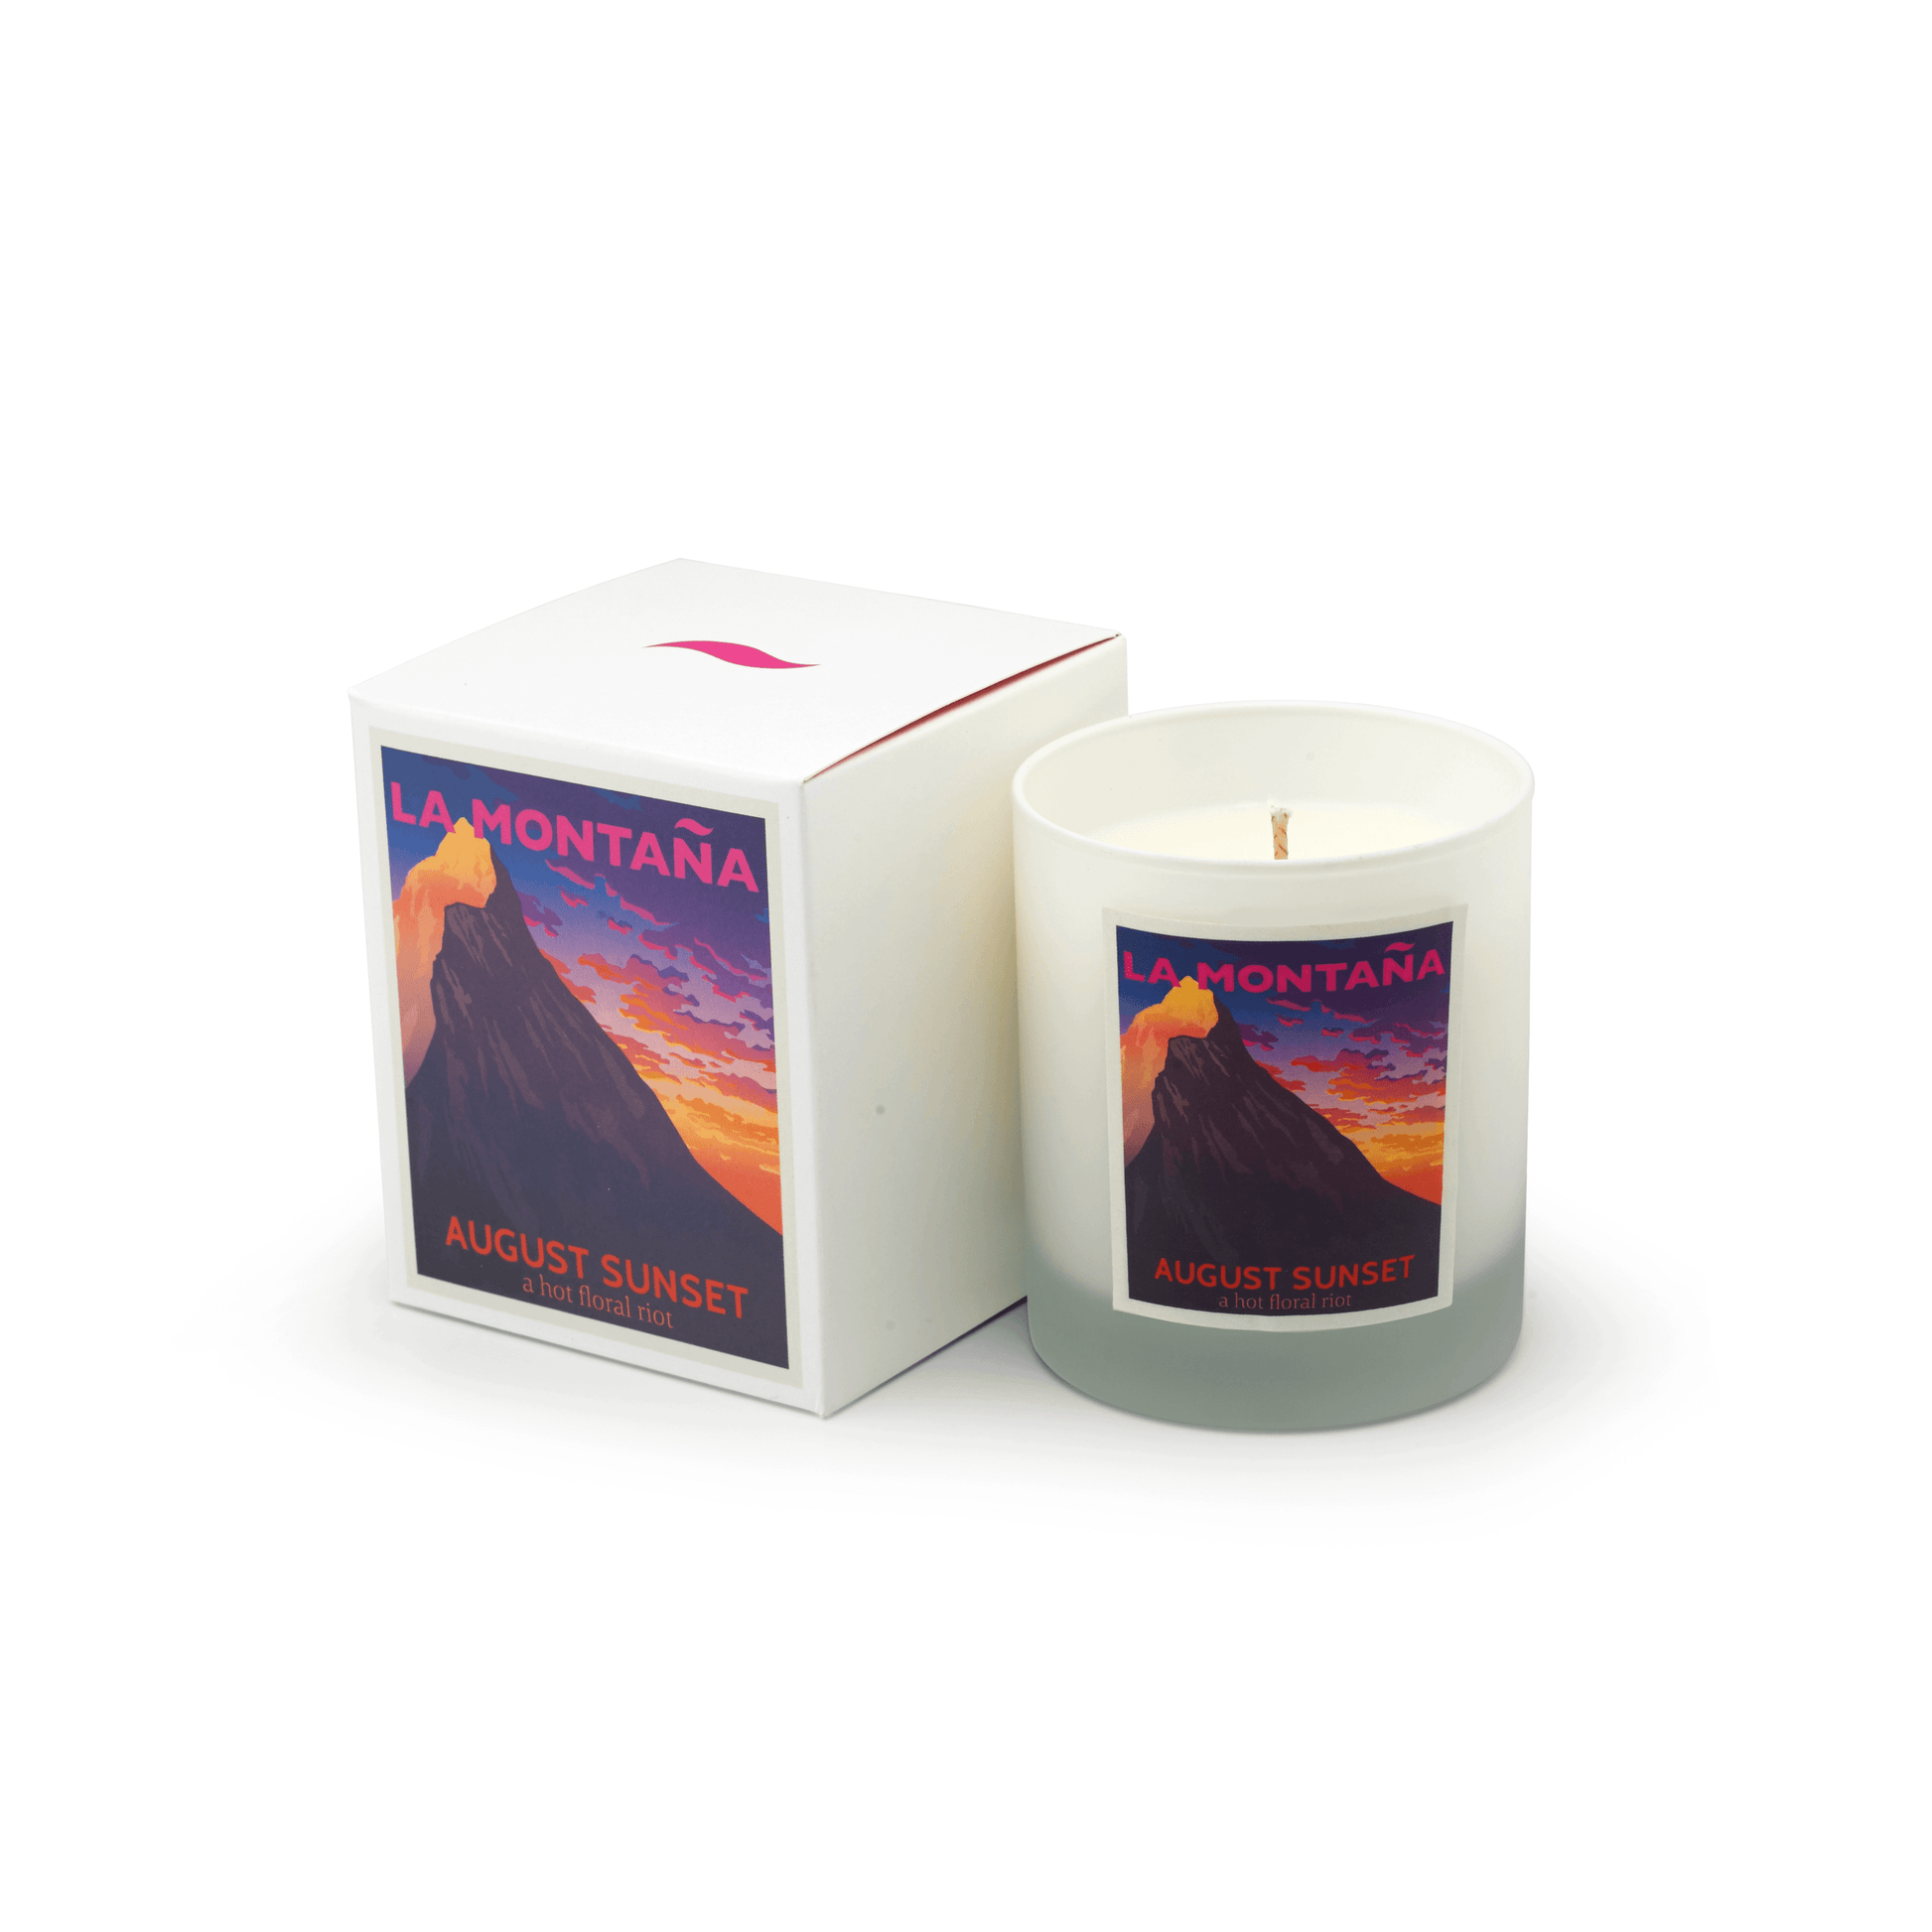 La Montaña August Sunset Scented Candle - Osmology Scented Candles & Home Fragrance